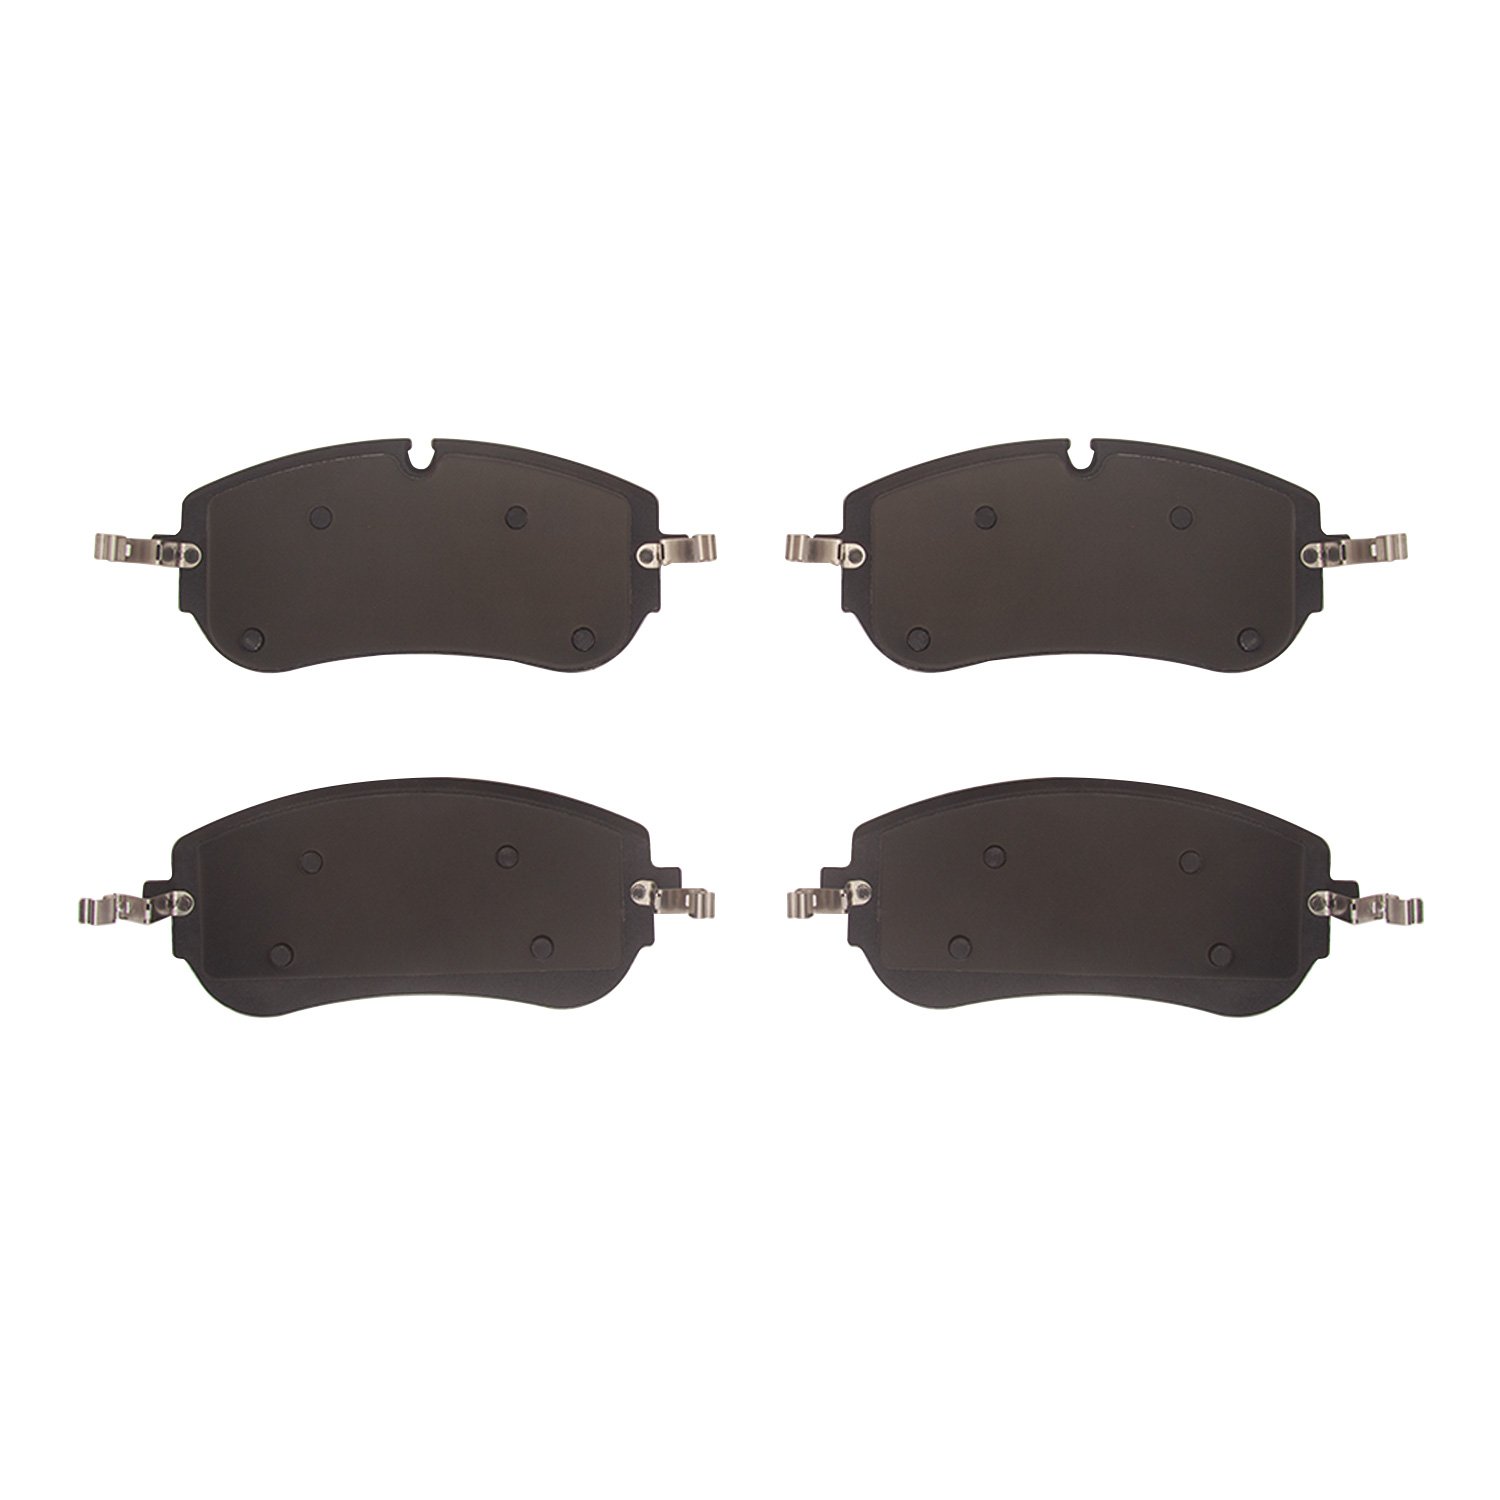 1552-2416-00 5000 Advanced Low-Metallic Brake Pads, Fits Select Land Rover, Position: Front